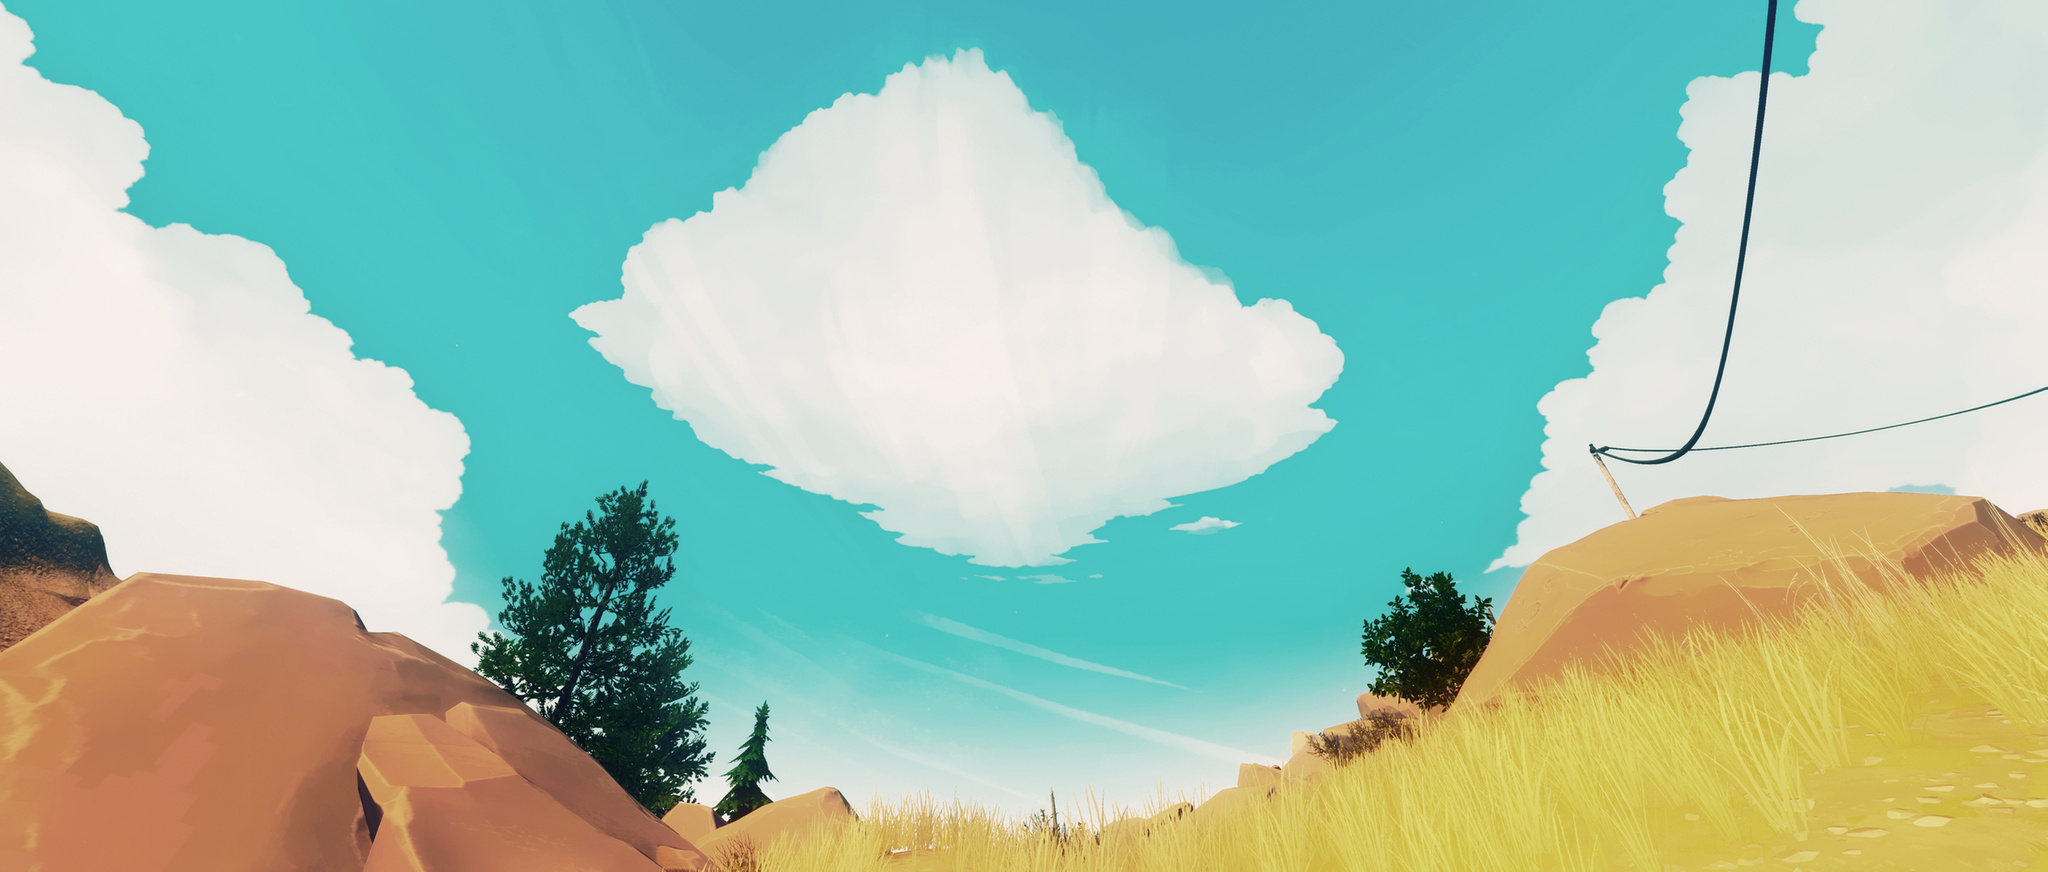 Firewatch Has Your Wallpaper Needs Covered For 2016